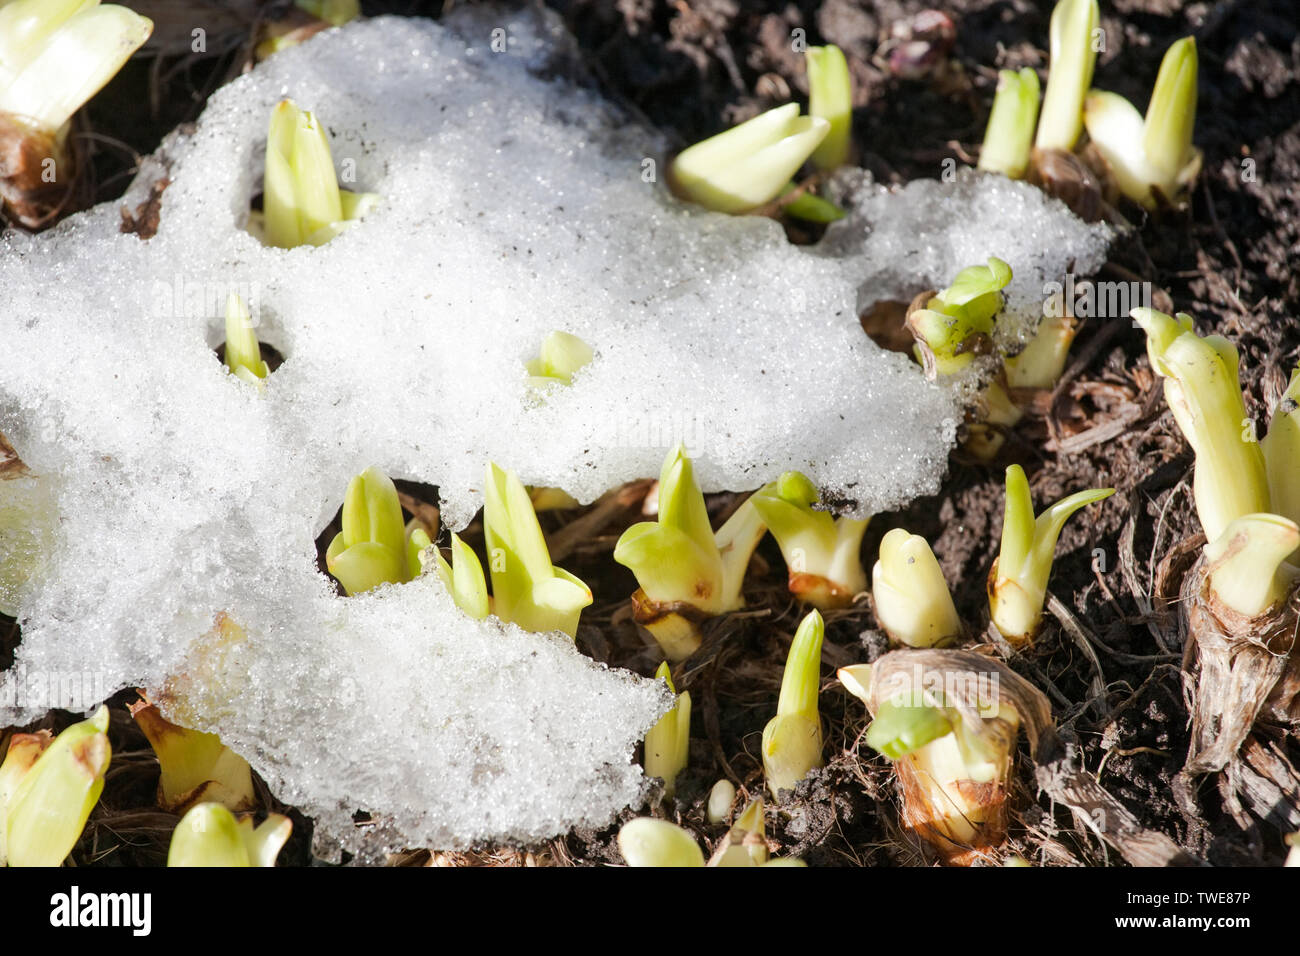 spring green plant sprouts growing through snow closeup view on outdoor ground background Stock Photo